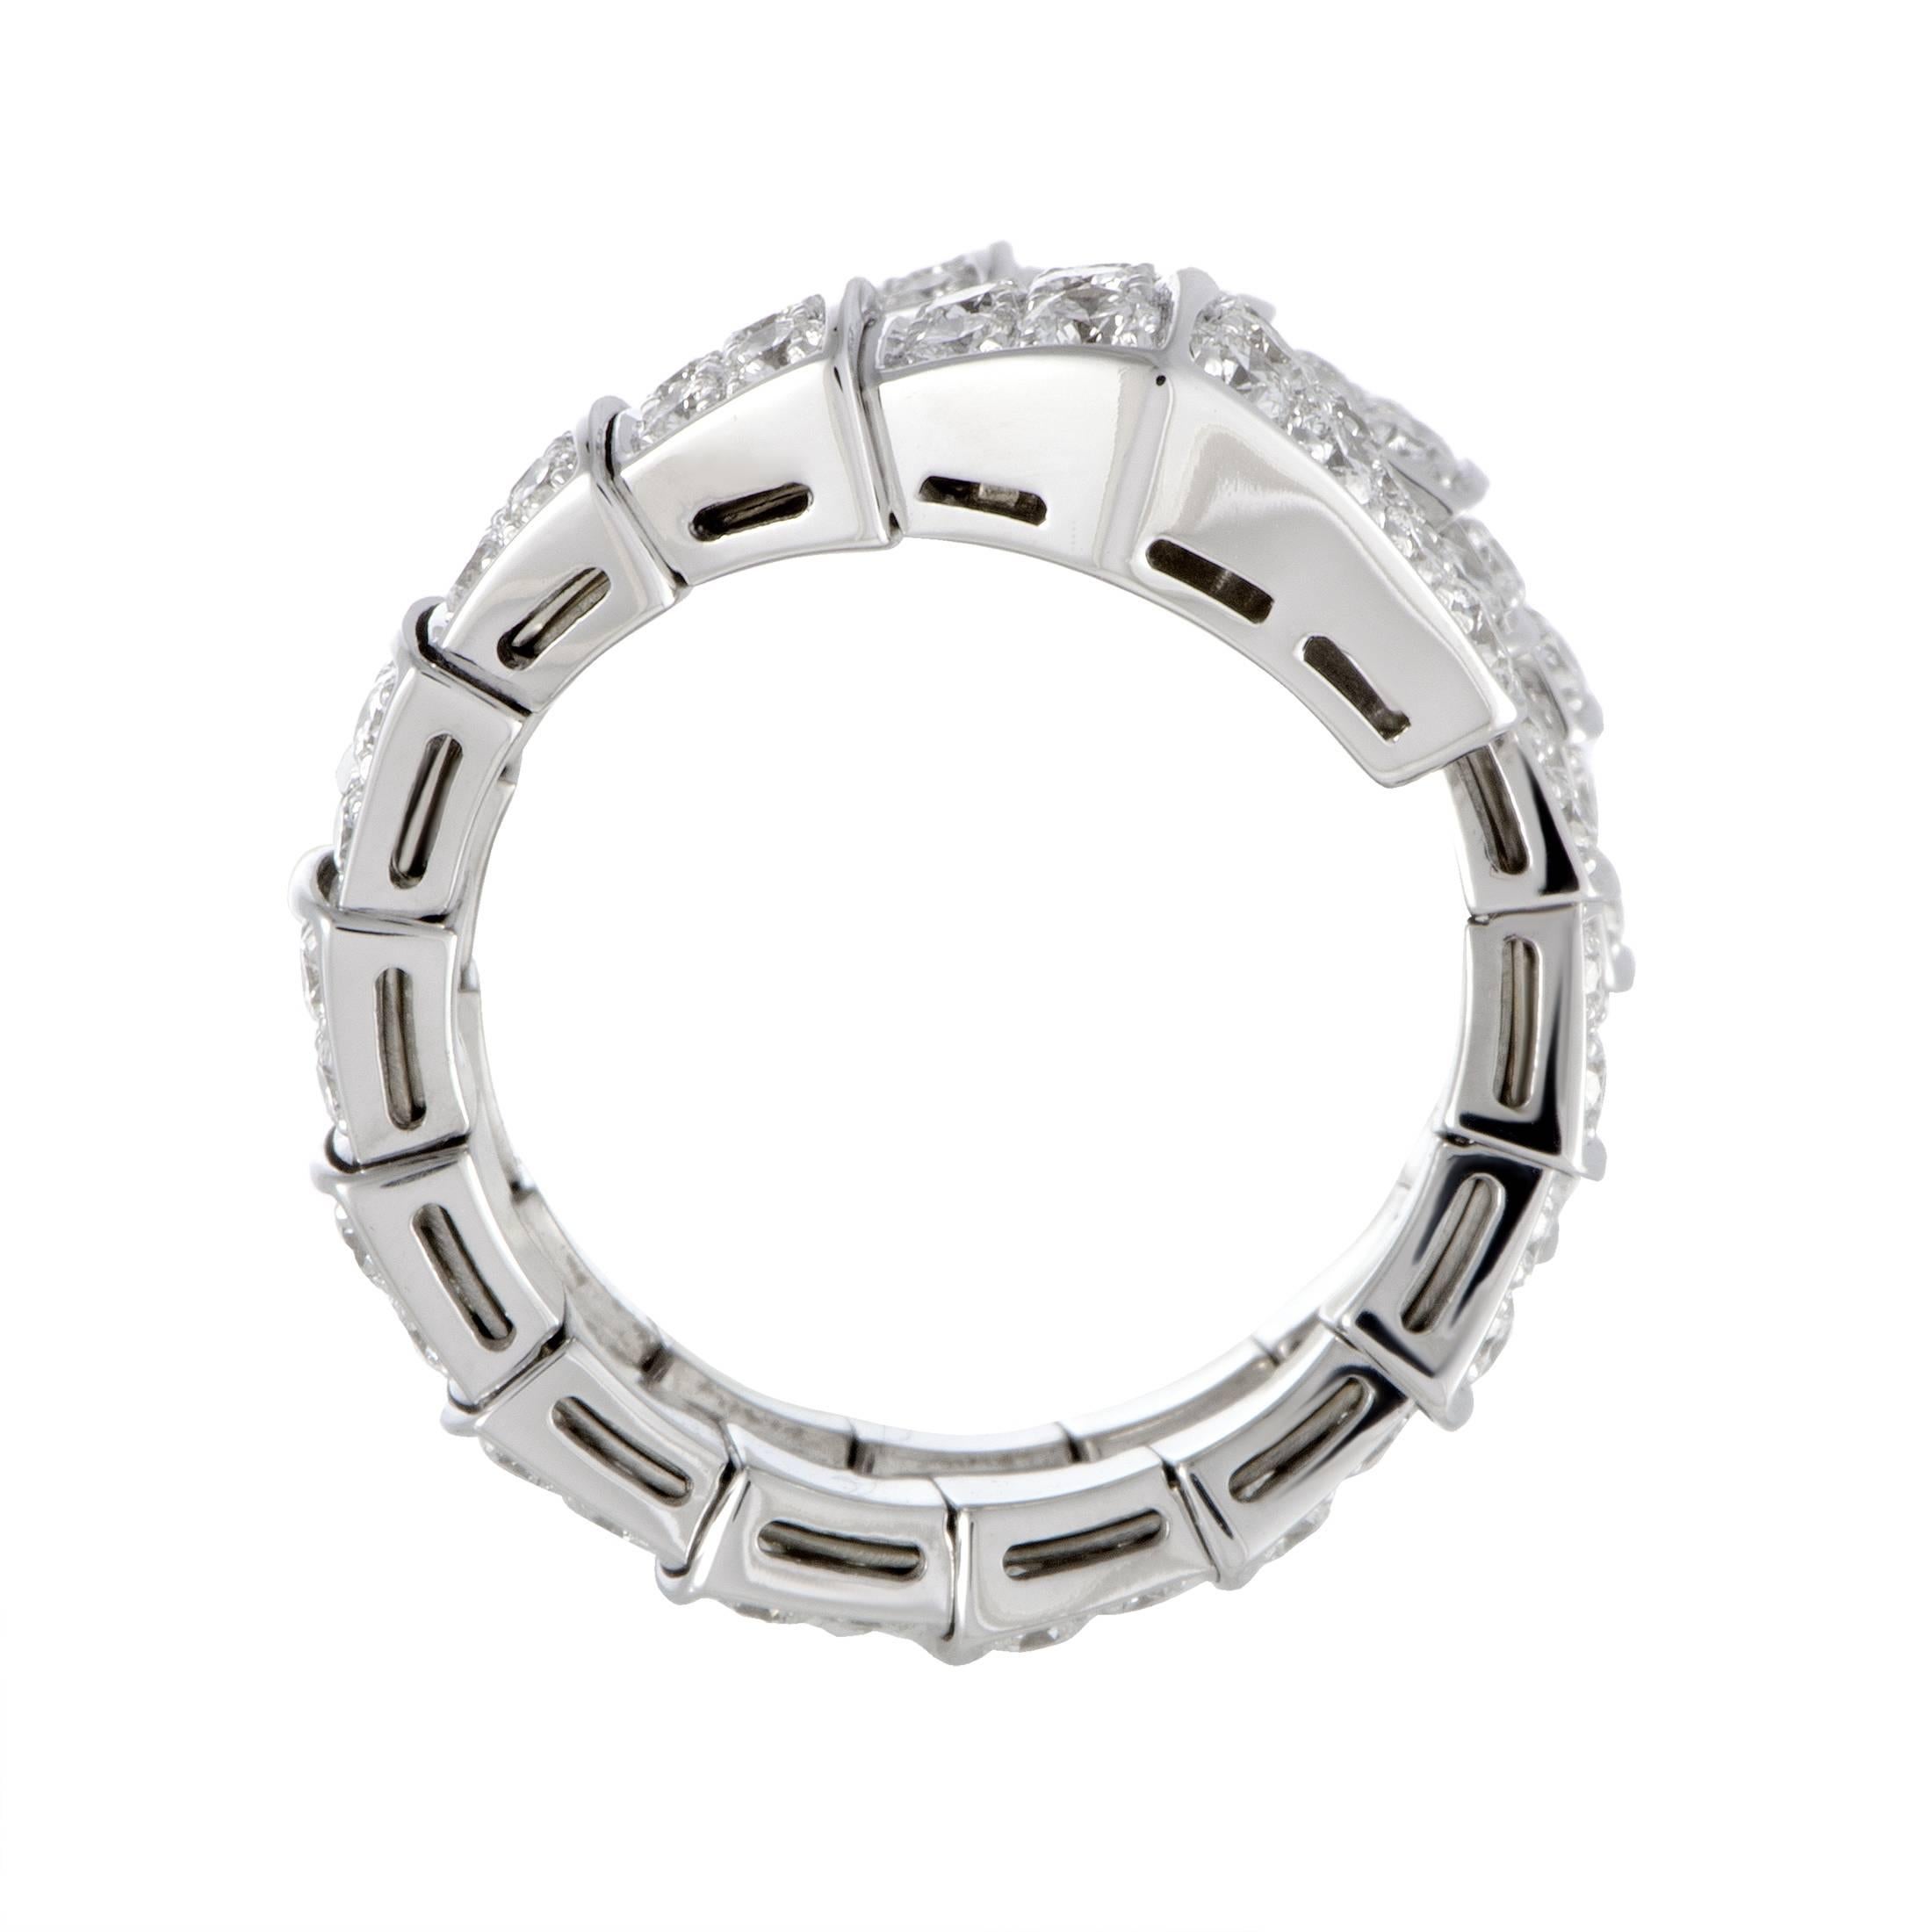 Coiling around your finger in an alluringly graceful manner, this Bvlgari ring offers an exceptionally elegant, prestigious appearance. The ring is made of gleaming 18K white gold and paved with scintillating diamonds that weigh in total 2.85